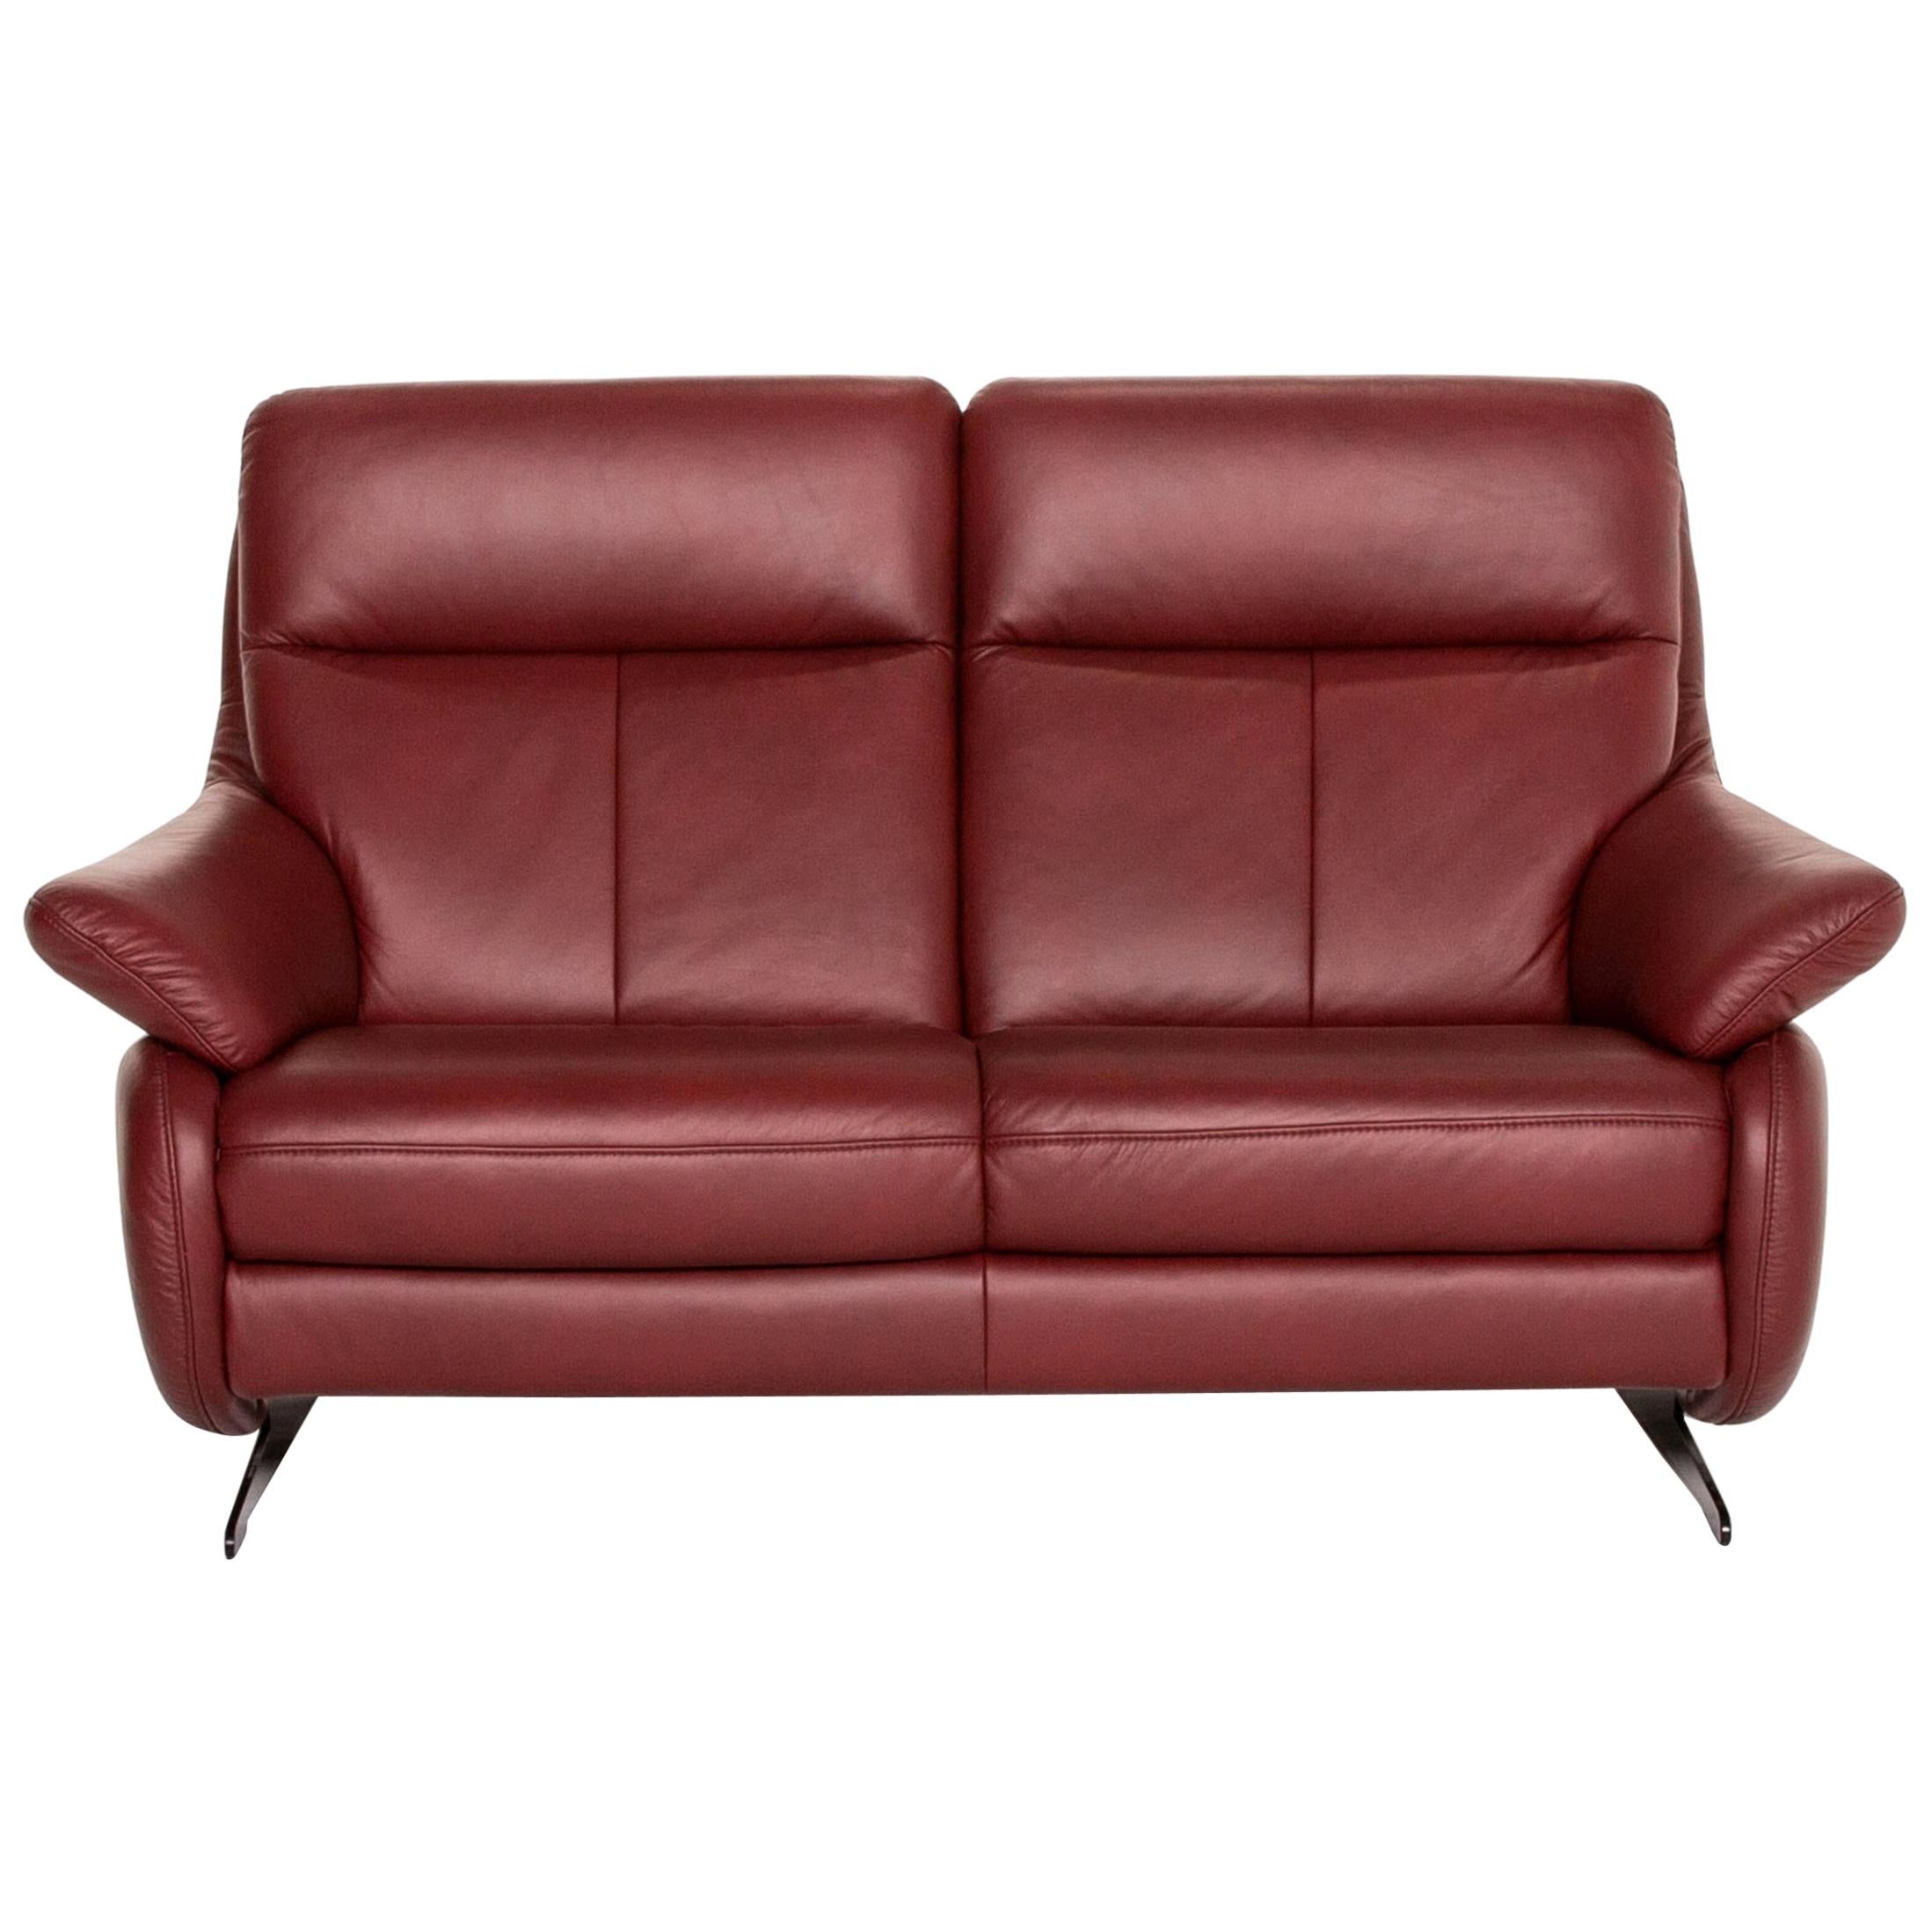 Himolla Leather Sofa Red Dark Red Two-Seat Couch For Sale